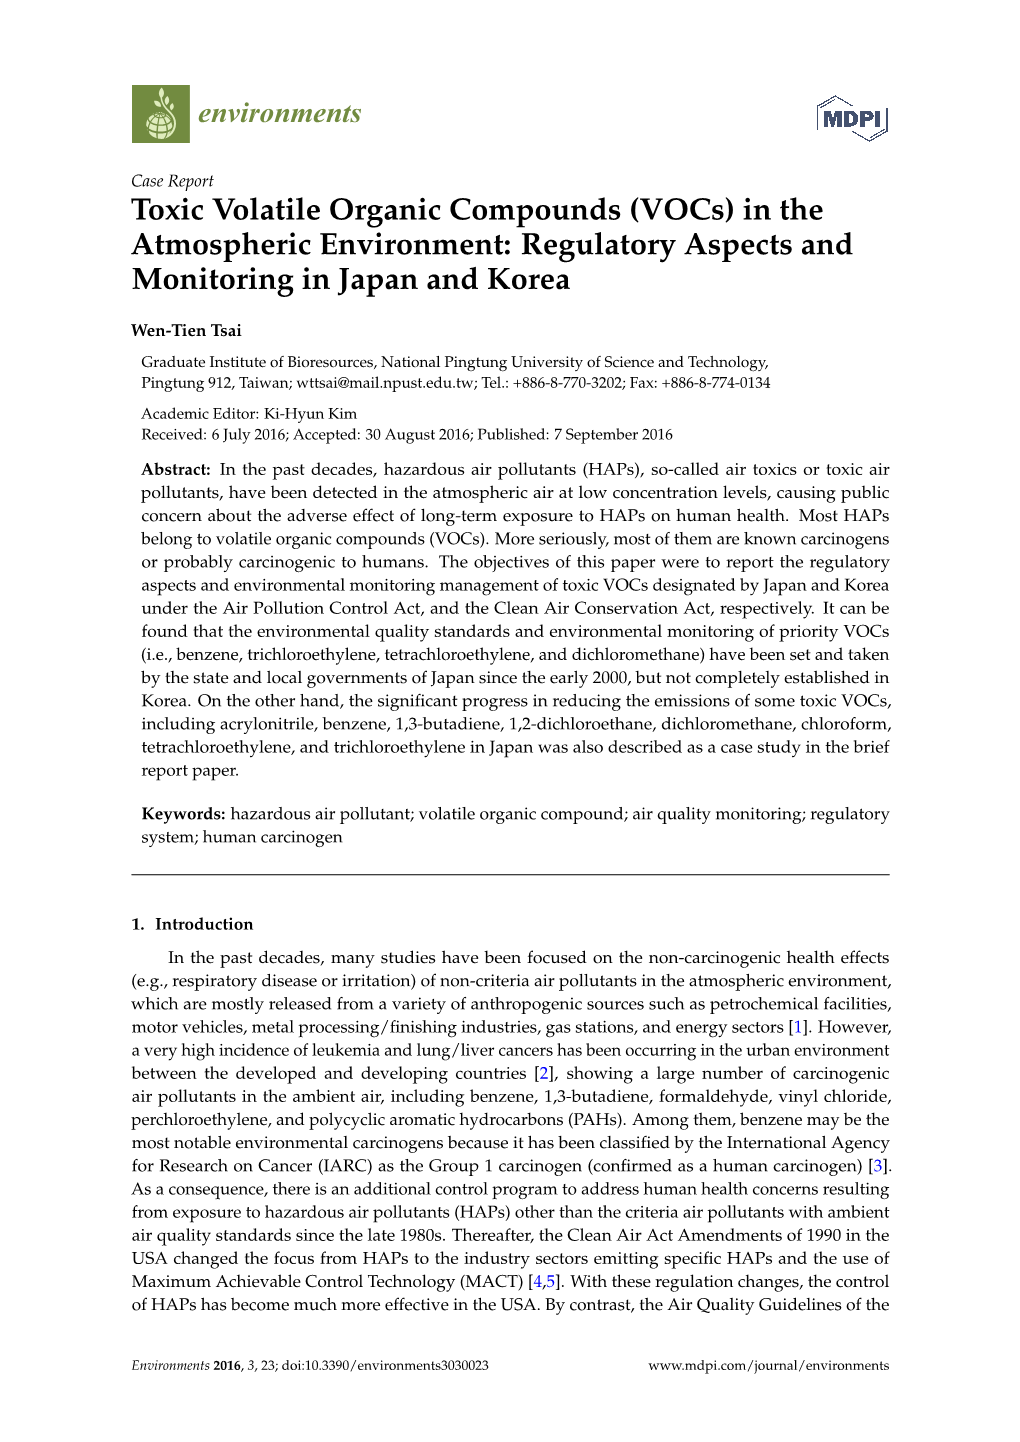 Toxic Volatile Organic Compounds (Vocs) in the Atmospheric Environment: Regulatory Aspects and Monitoring in Japan and Korea